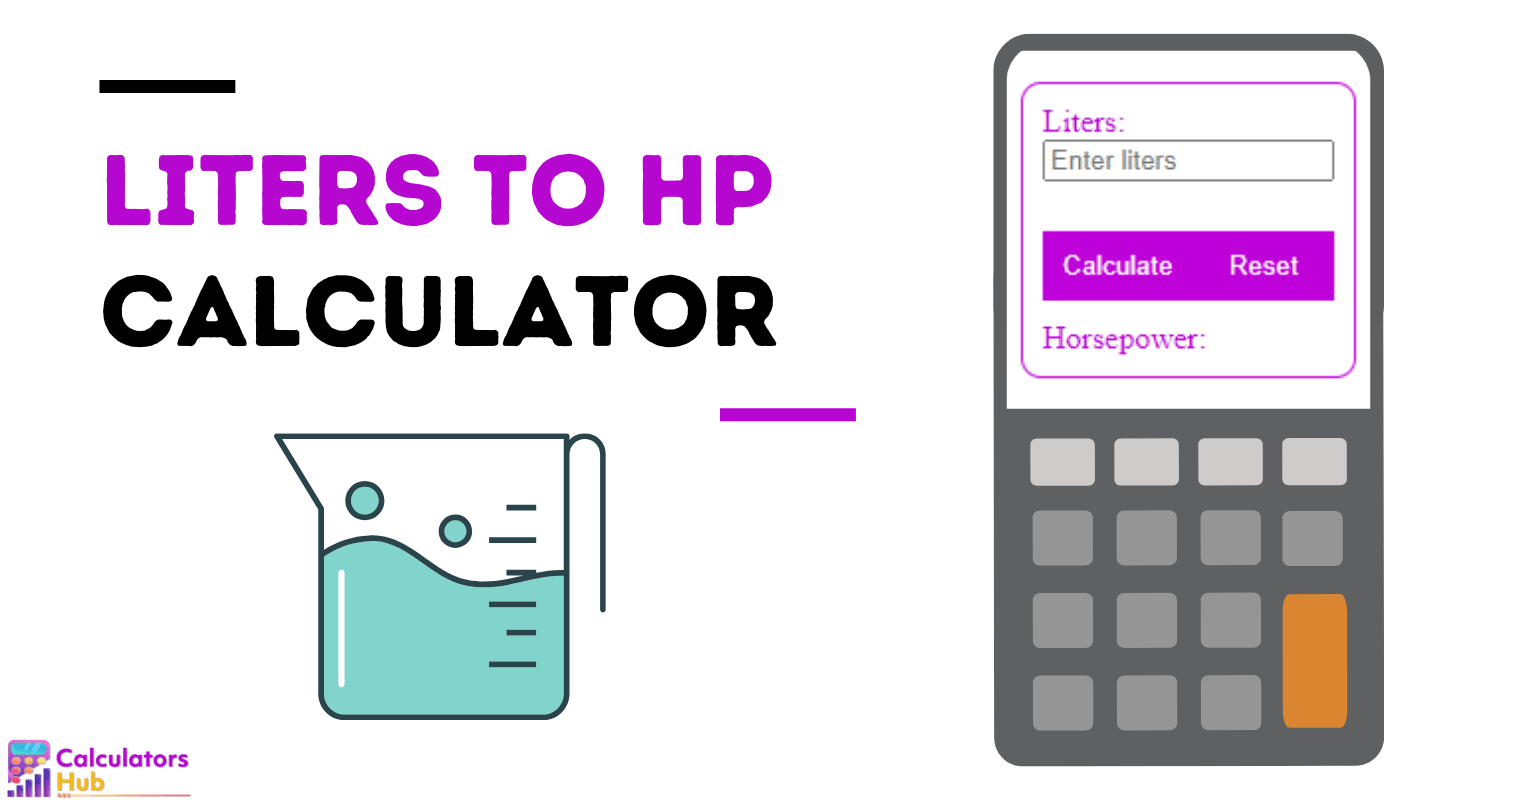 Liters to HP Calculator